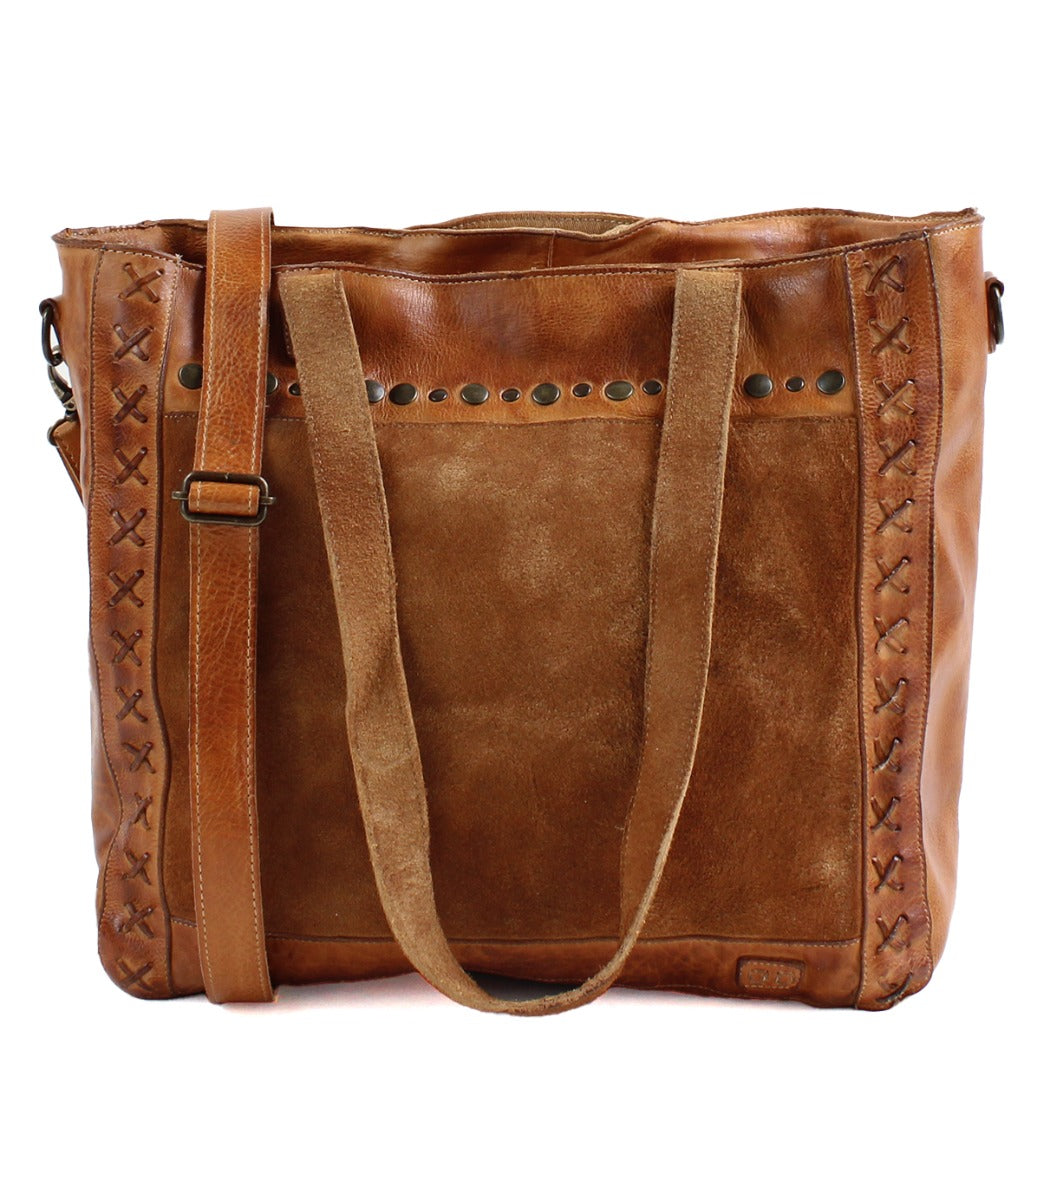 A Renata LTC brown leather tote bag with studded details by Bed Stu.